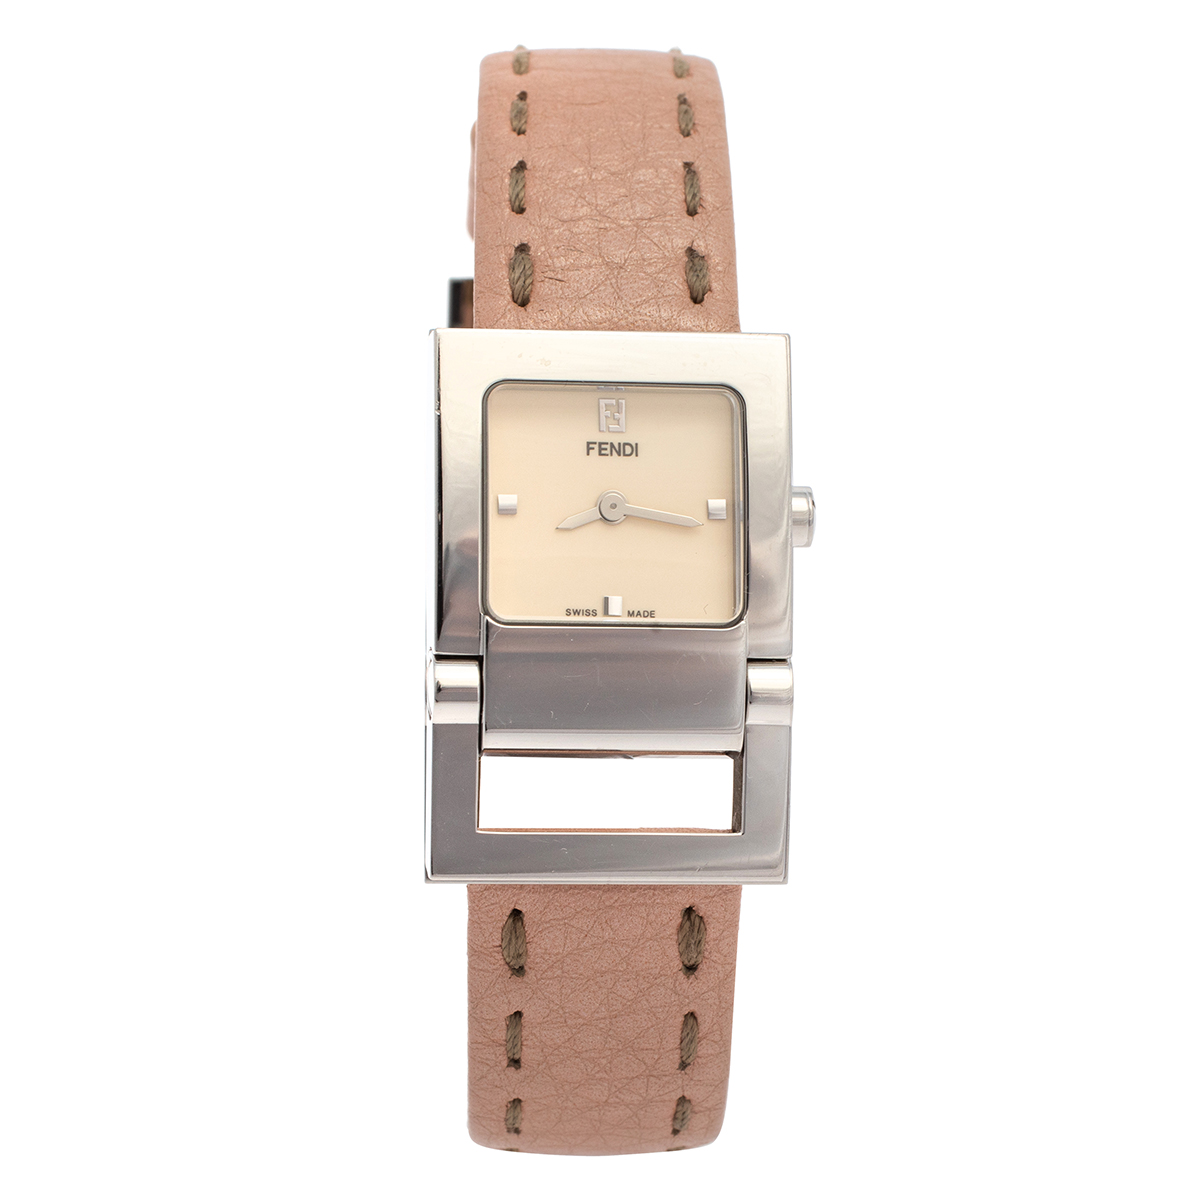 Pre-owned Fendi Creme Stainless Steel Leather 5200l Quartz Women's Wristwatch 23mm In Cream